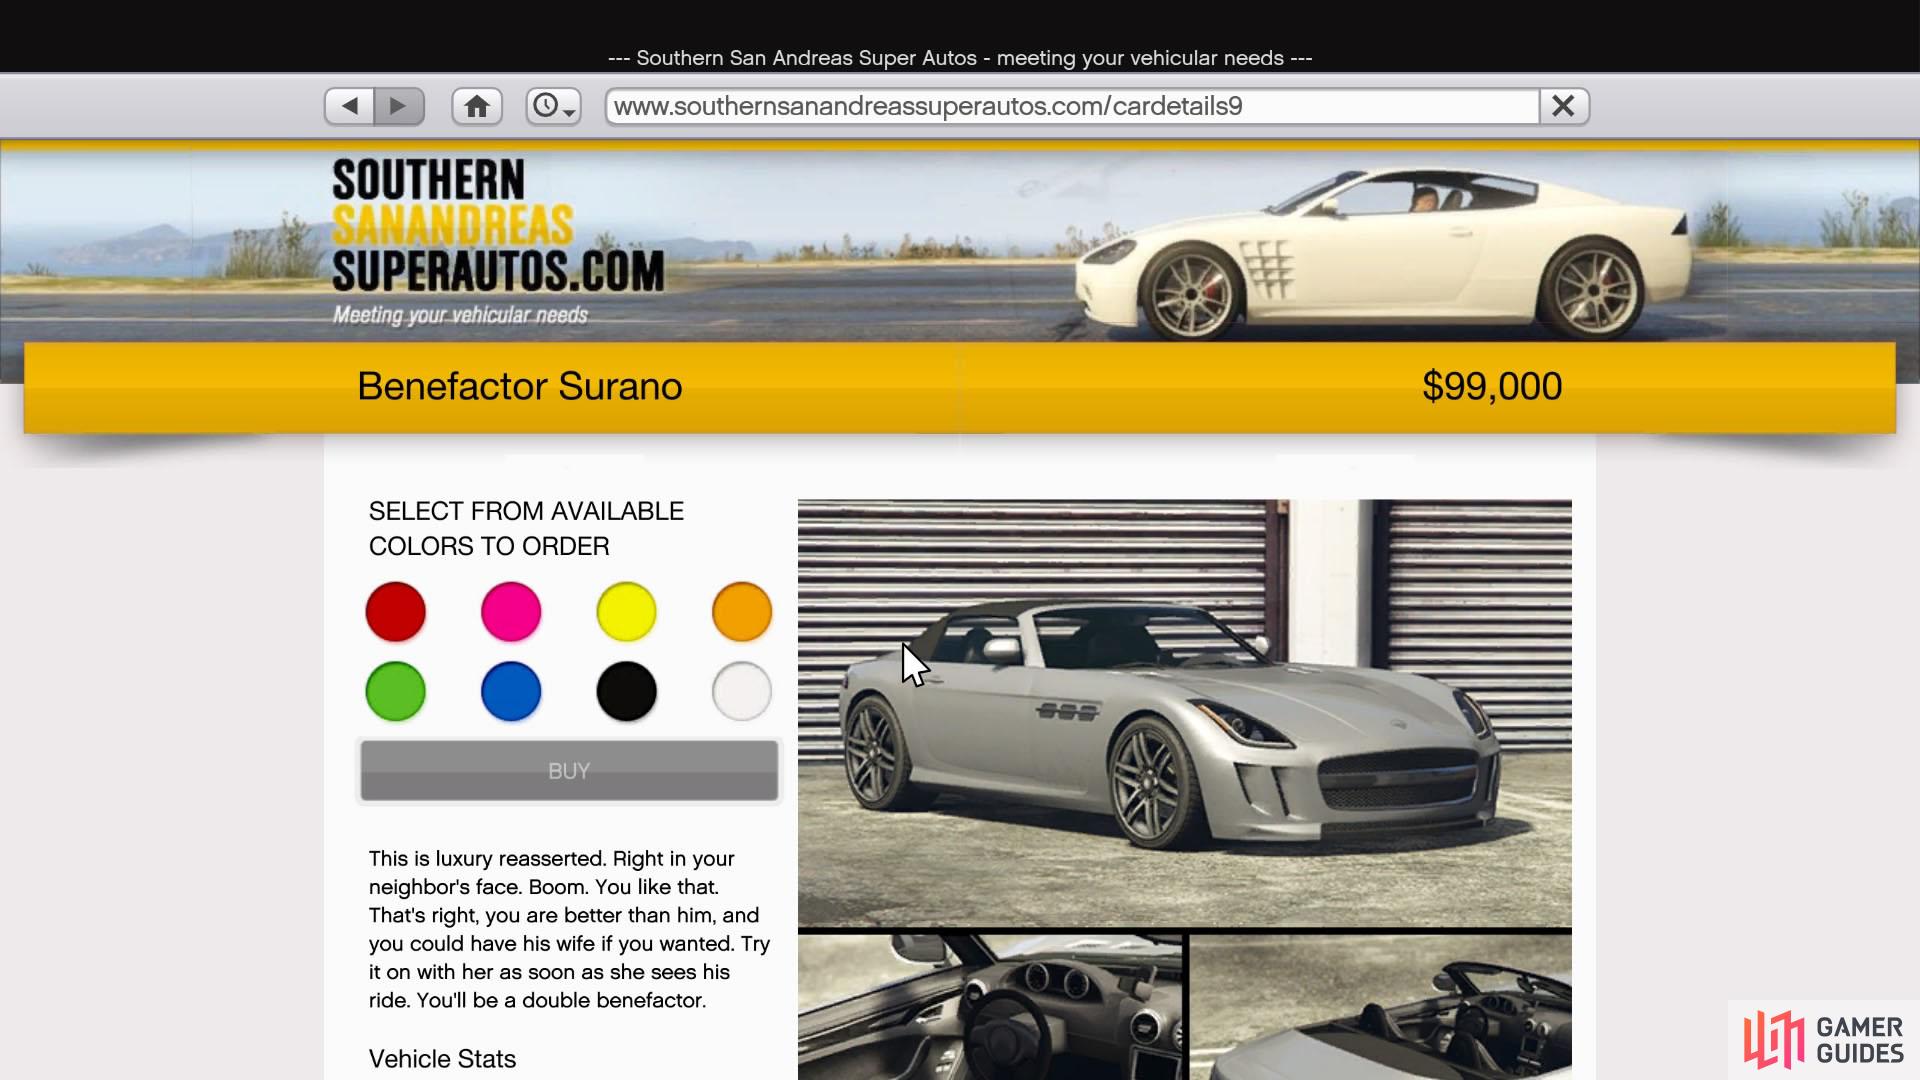 Purchase the Surano off Southern San Andreas Super Auto for $99,000